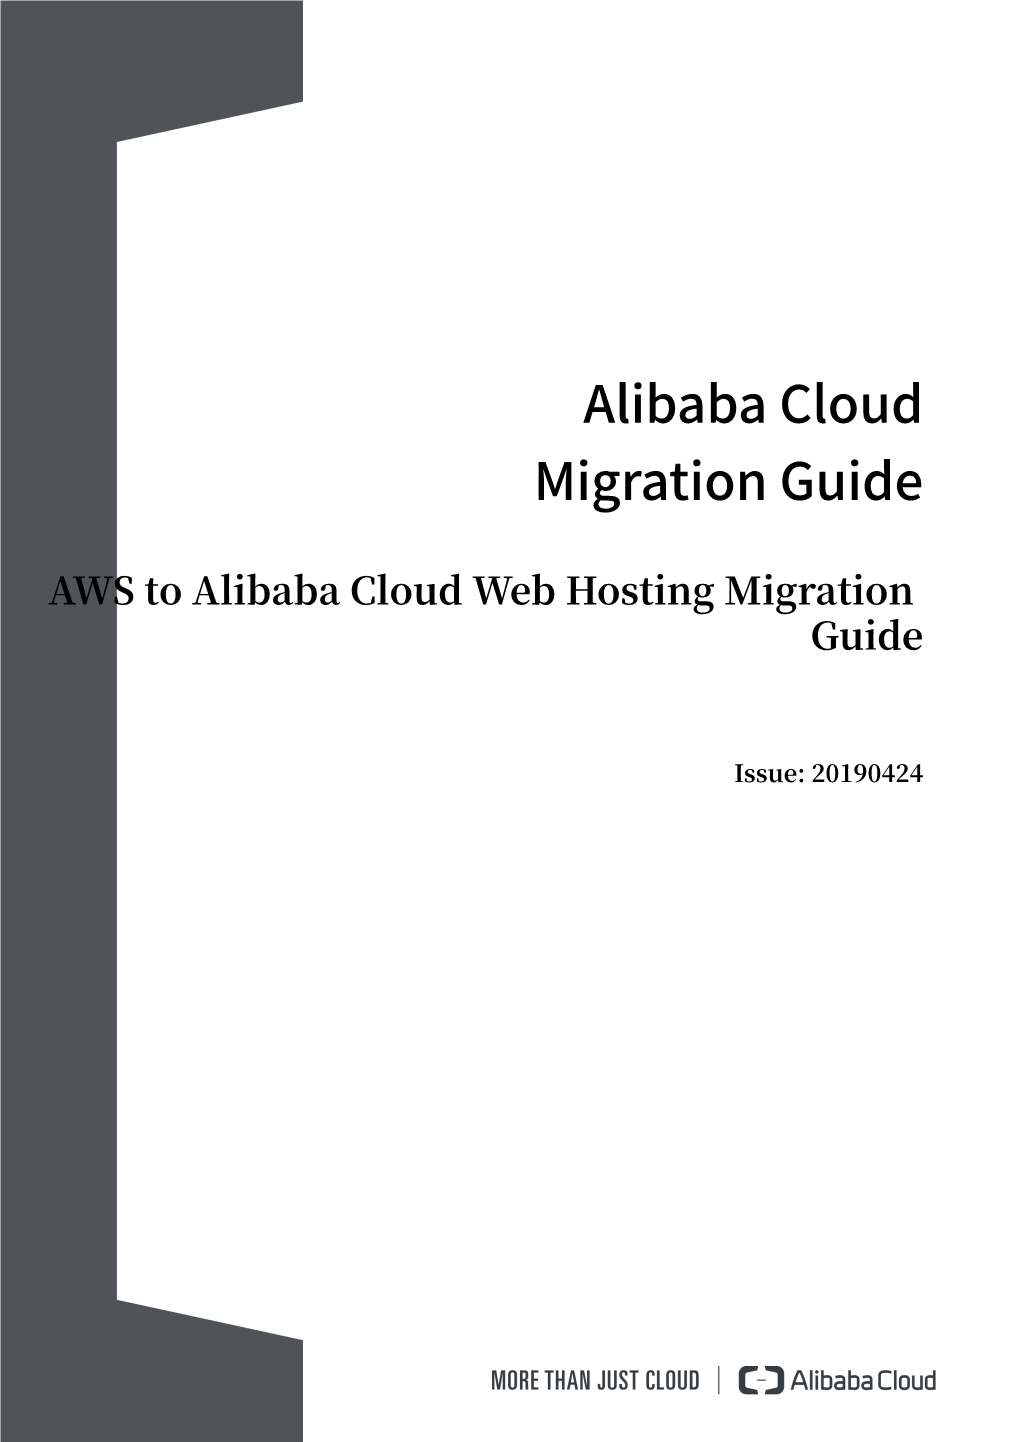 AWS to Alibaba Cloud Web Hosting Migration Guide